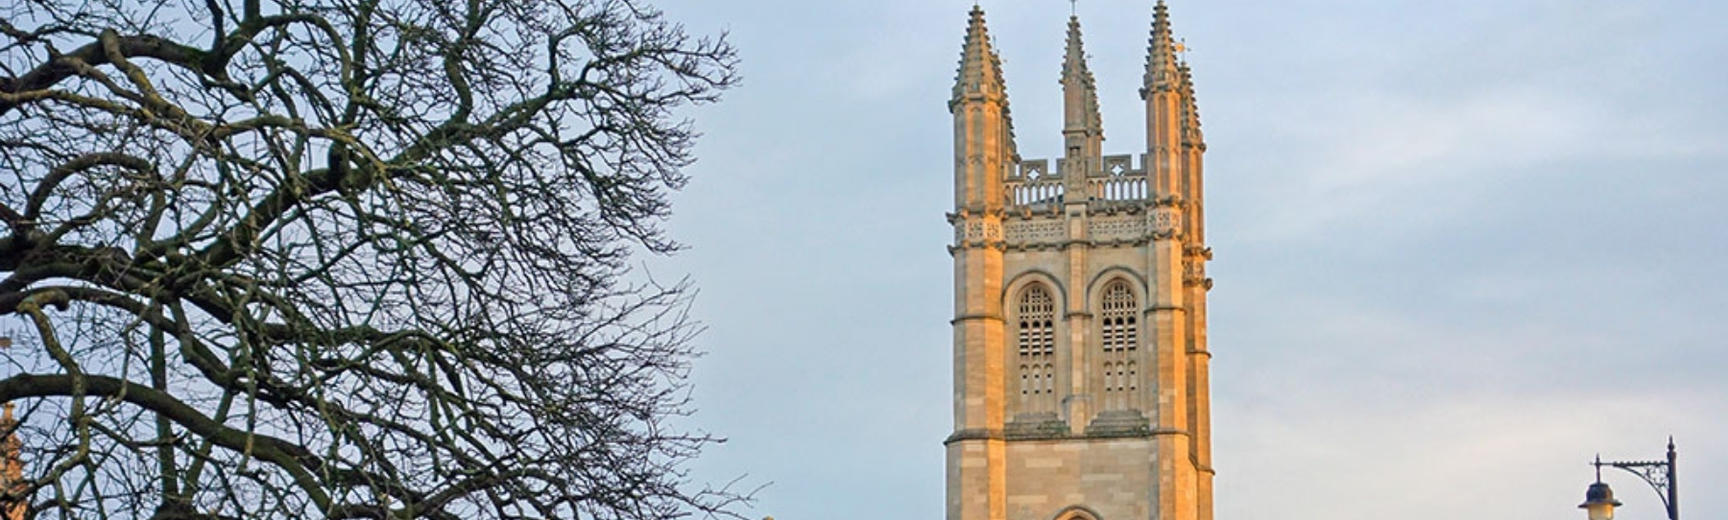 Tower of Magdalen College, Oxford